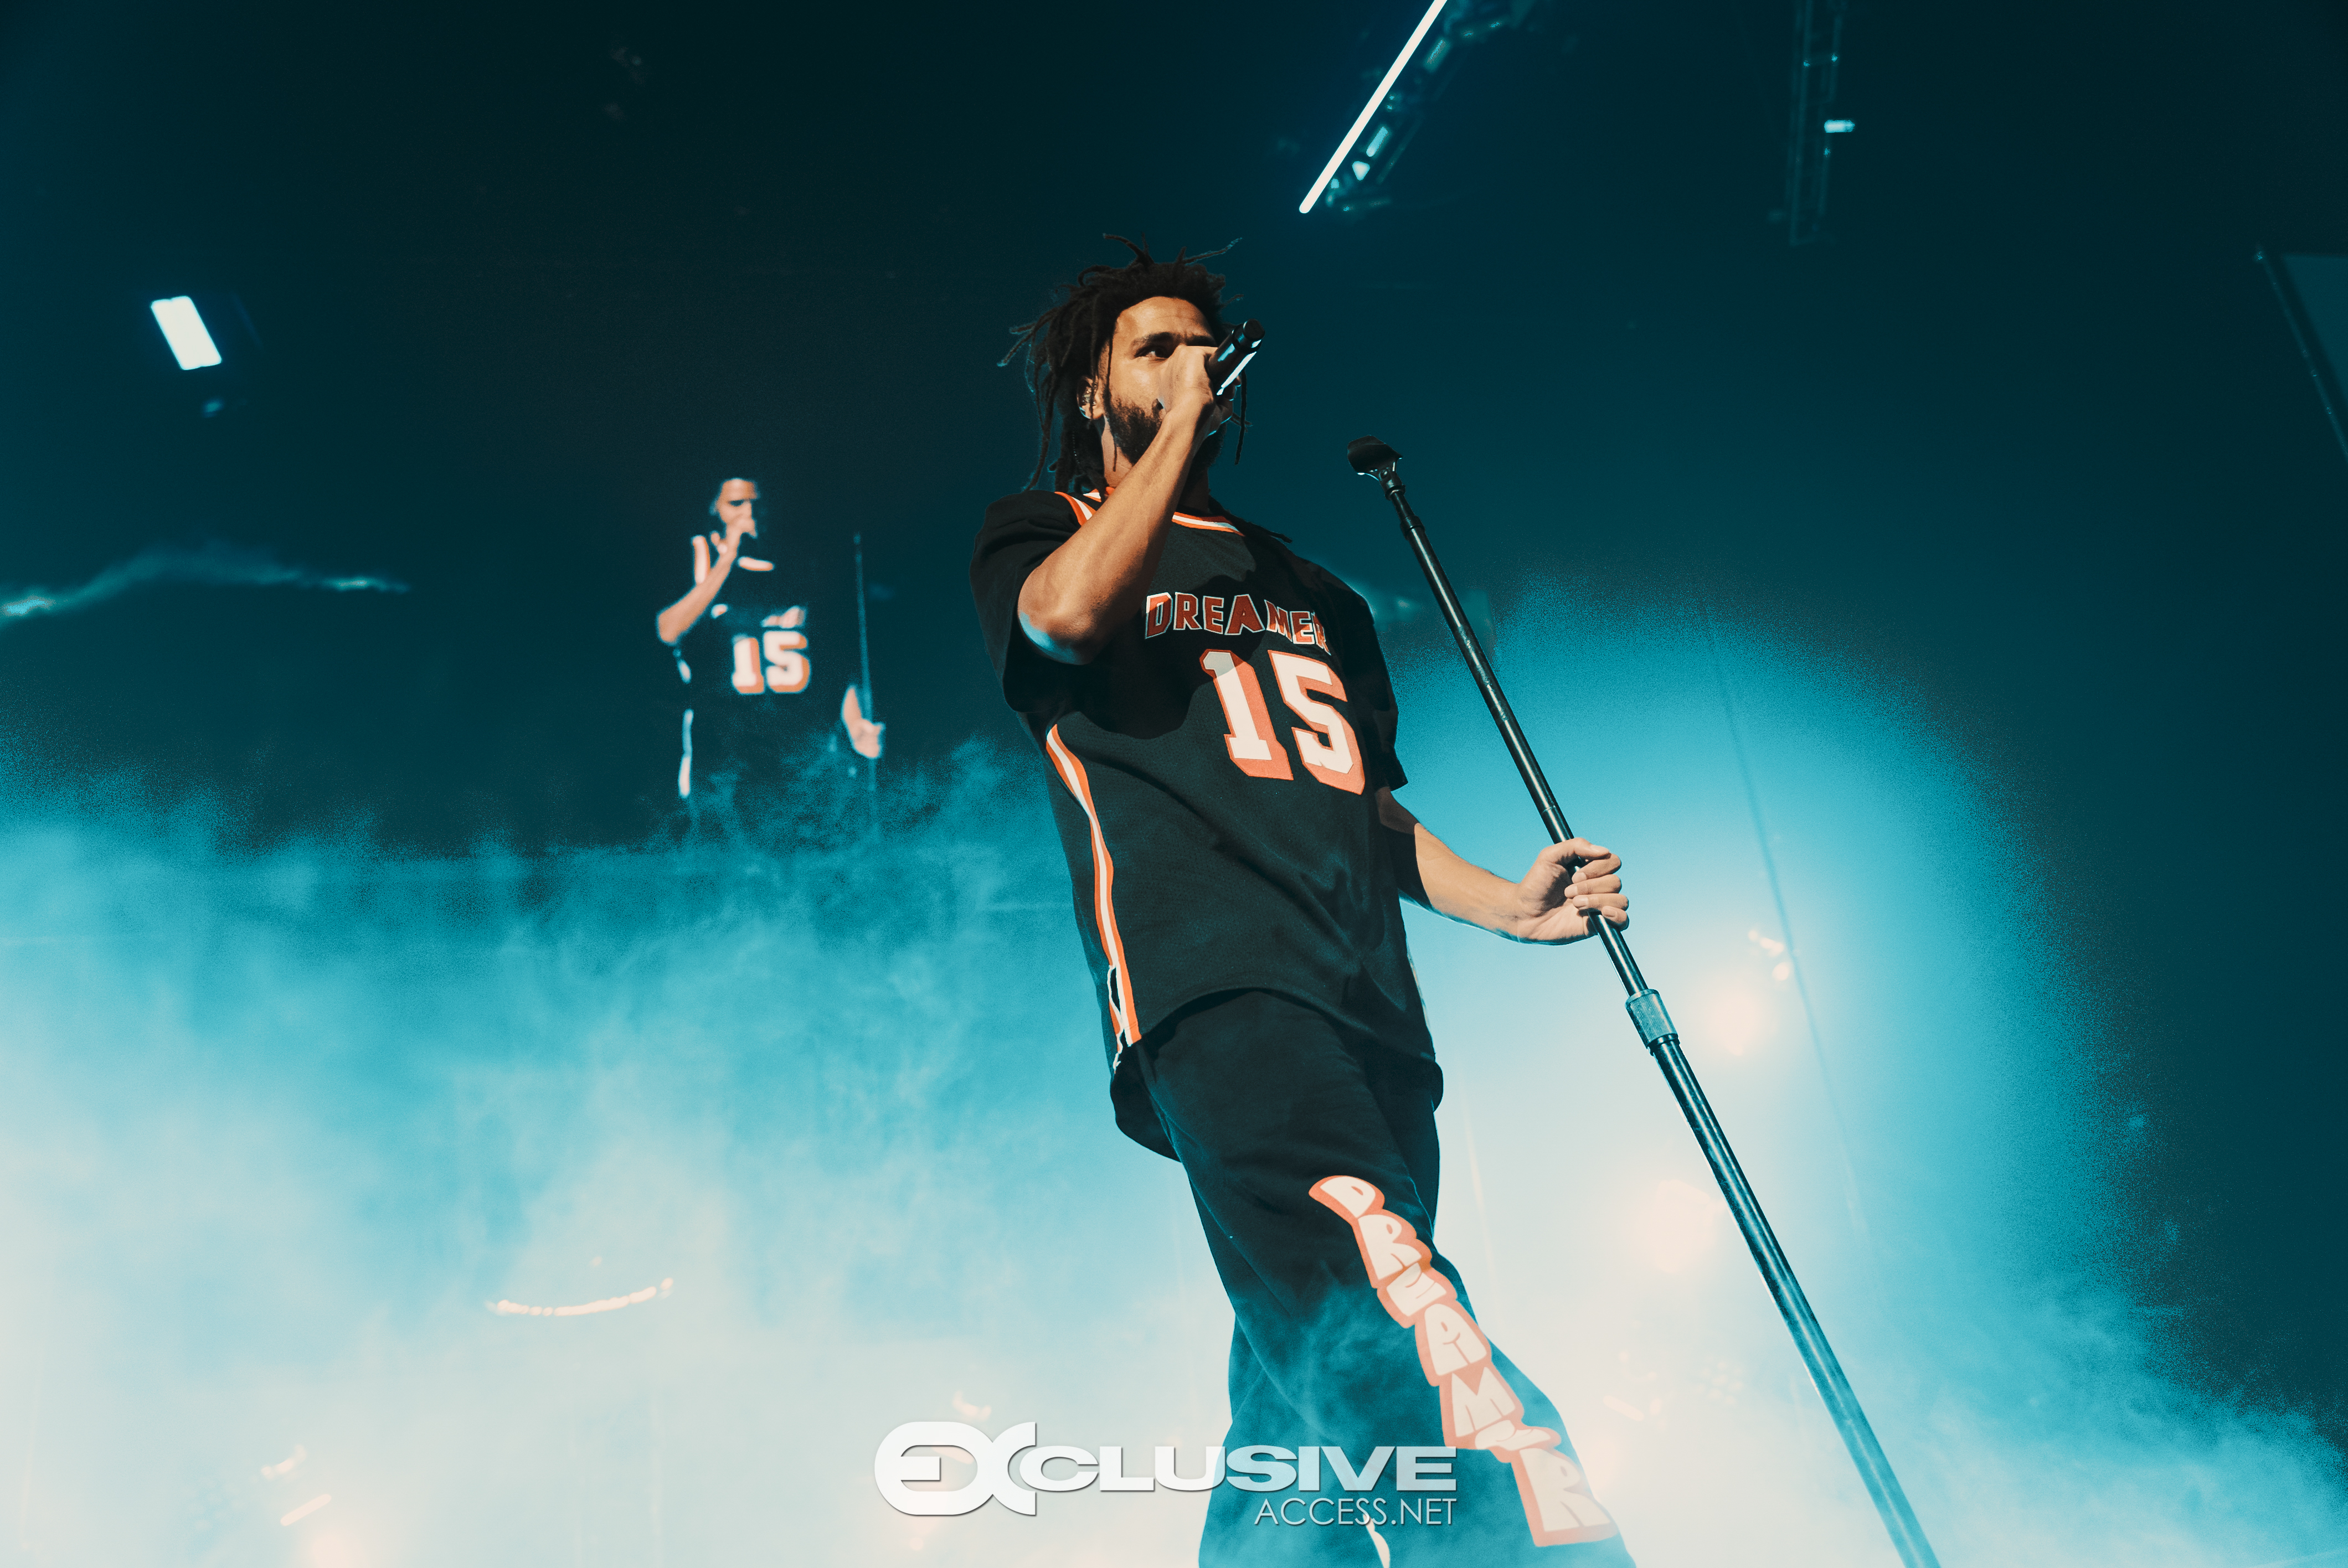 J Cole presents The Off Season Tour (photos by Ed Roberson - ExclusiveAccess.Net)-31